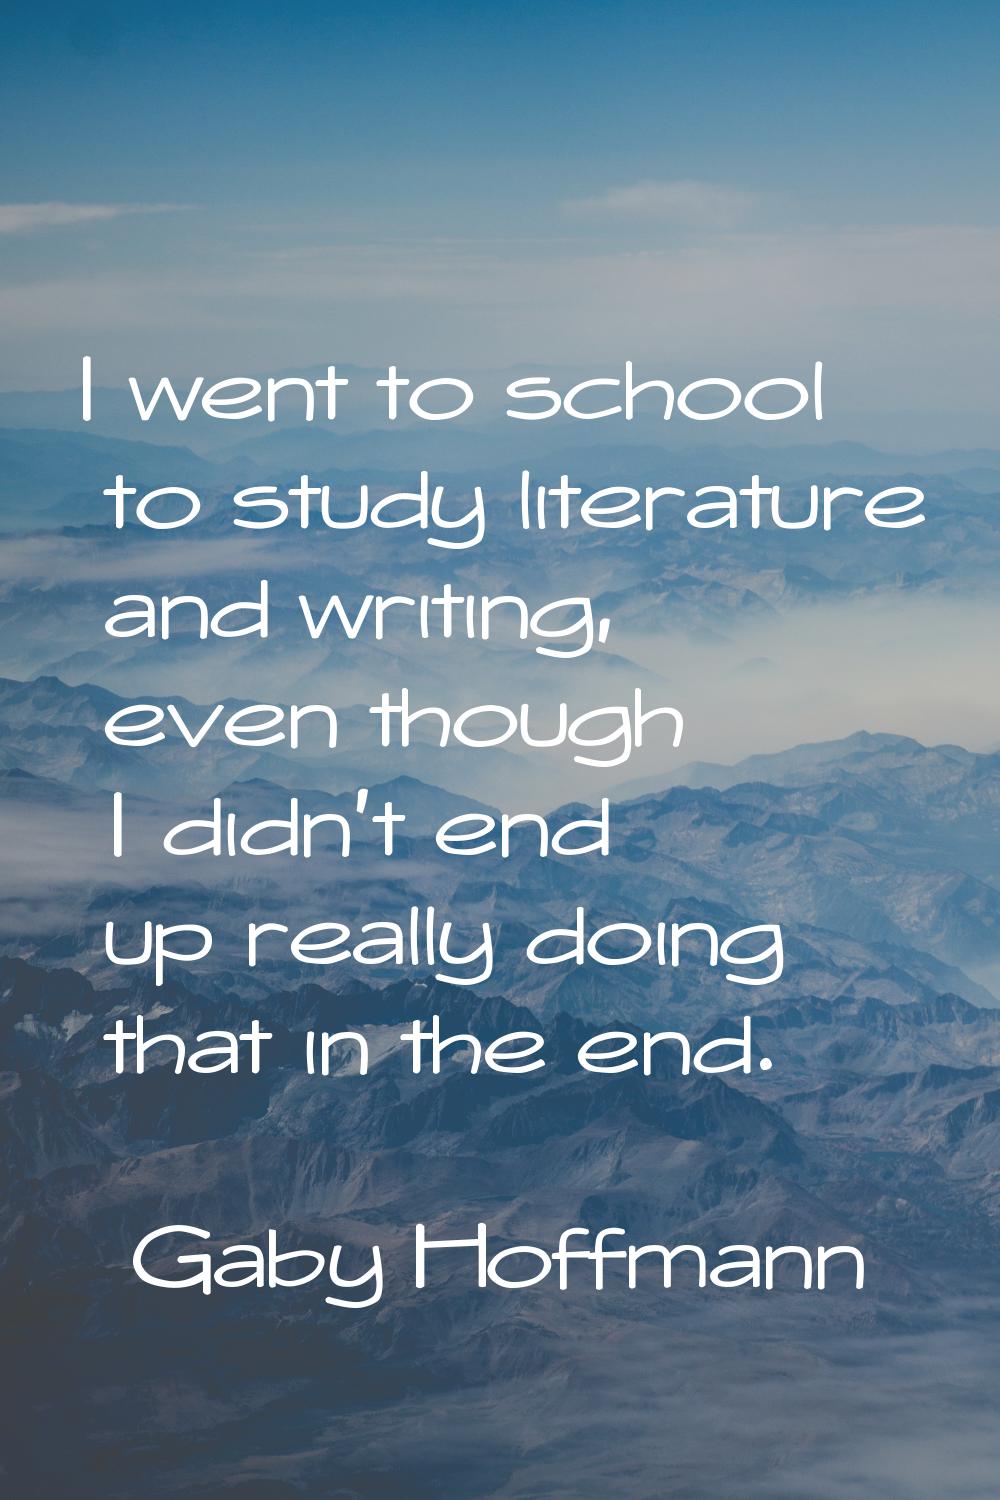 I went to school to study literature and writing, even though I didn't end up really doing that in 